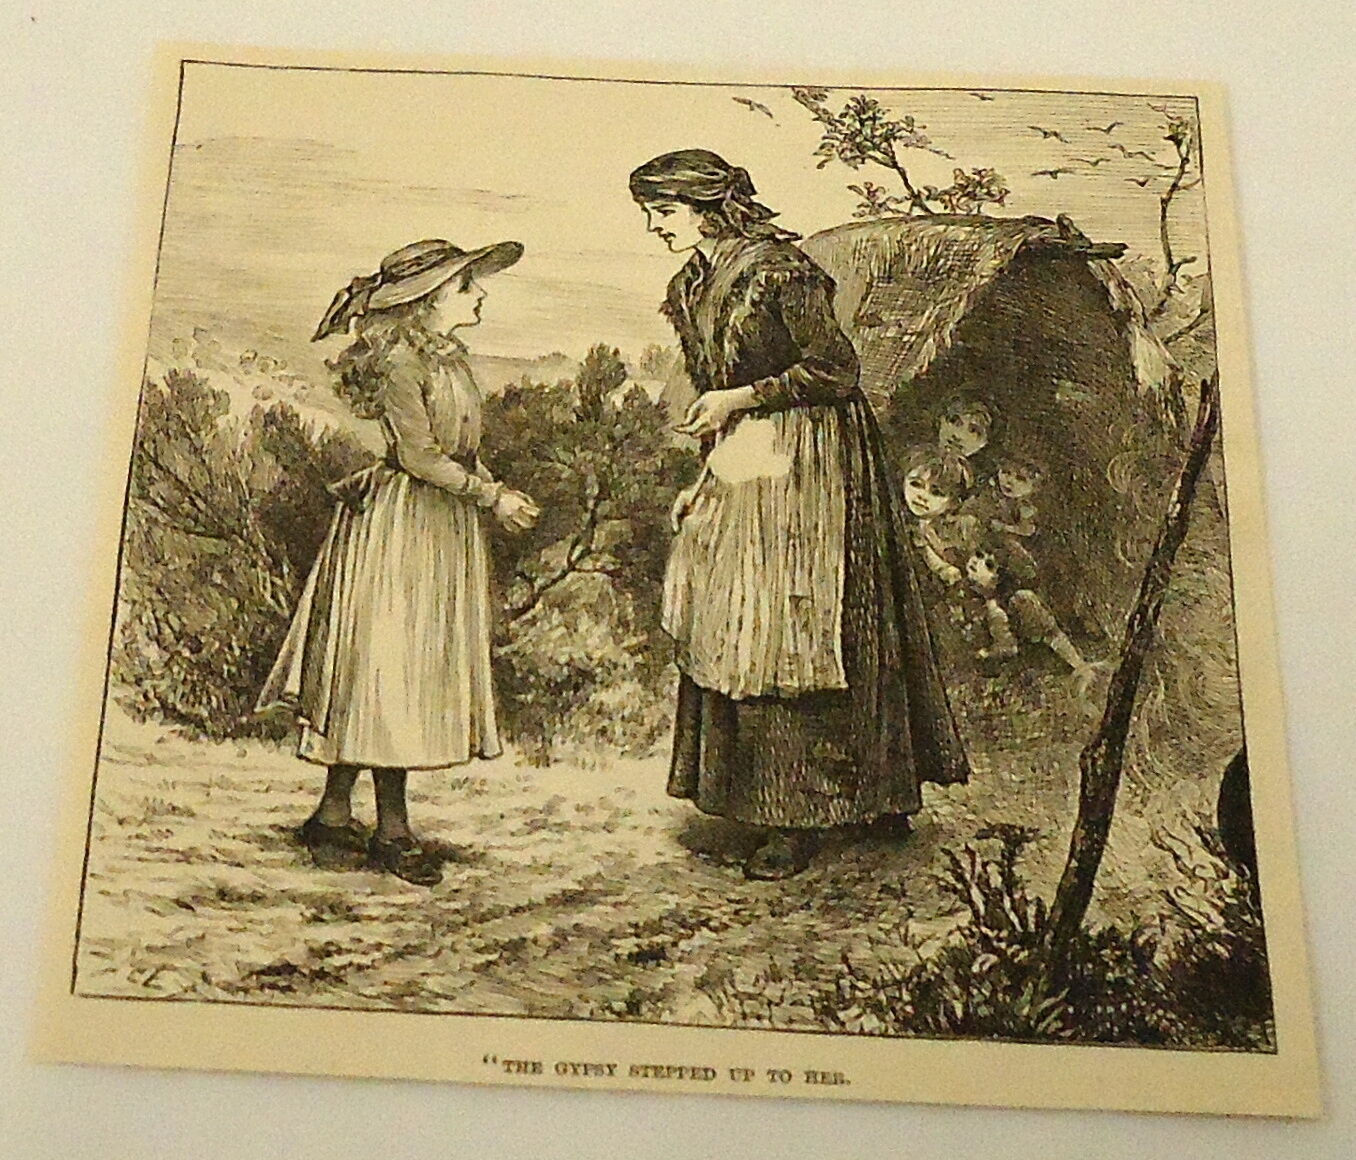 1884 magazine engraving ~ THE GYPSY STEPPED UP TO HER - gypsy camp w/ kids